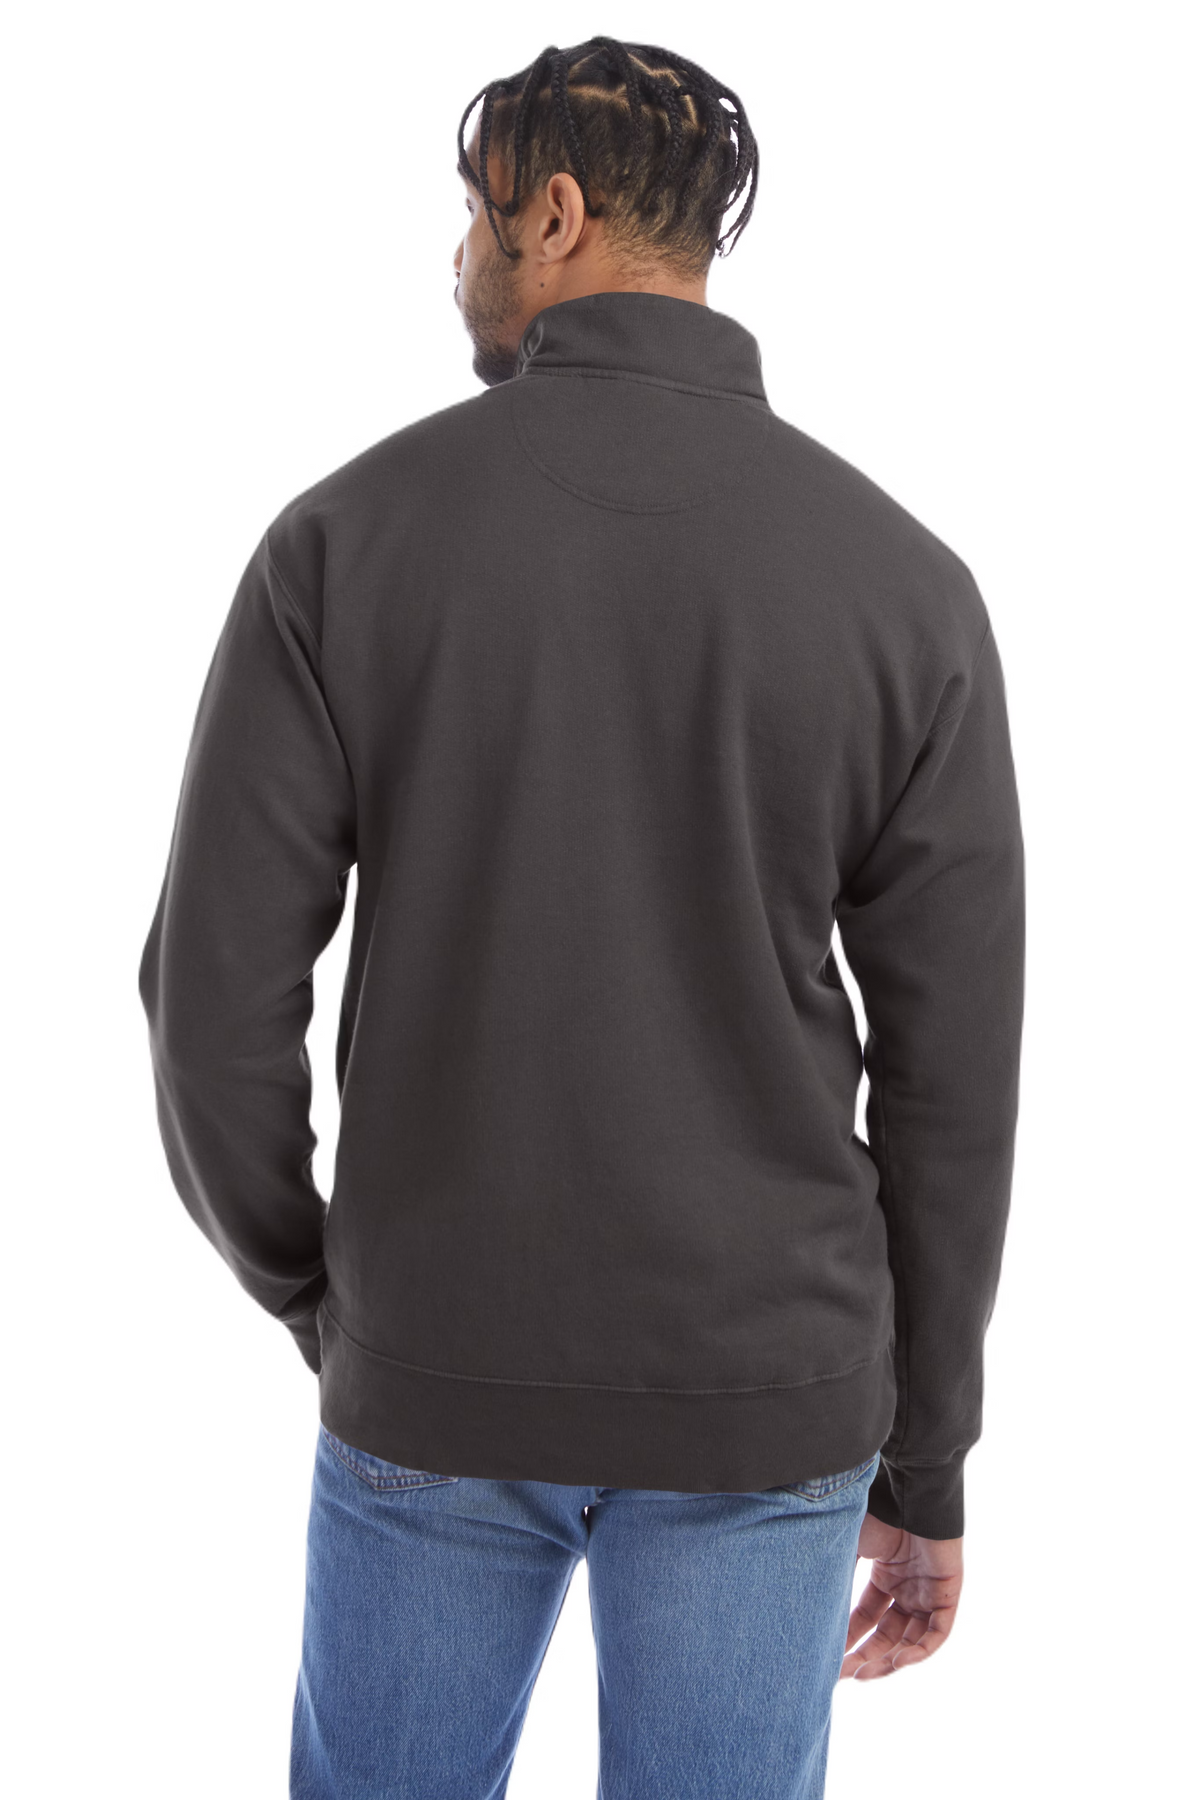 Bridging the Gap Leadership Conference Zip Pullover - FREE SHIPPING